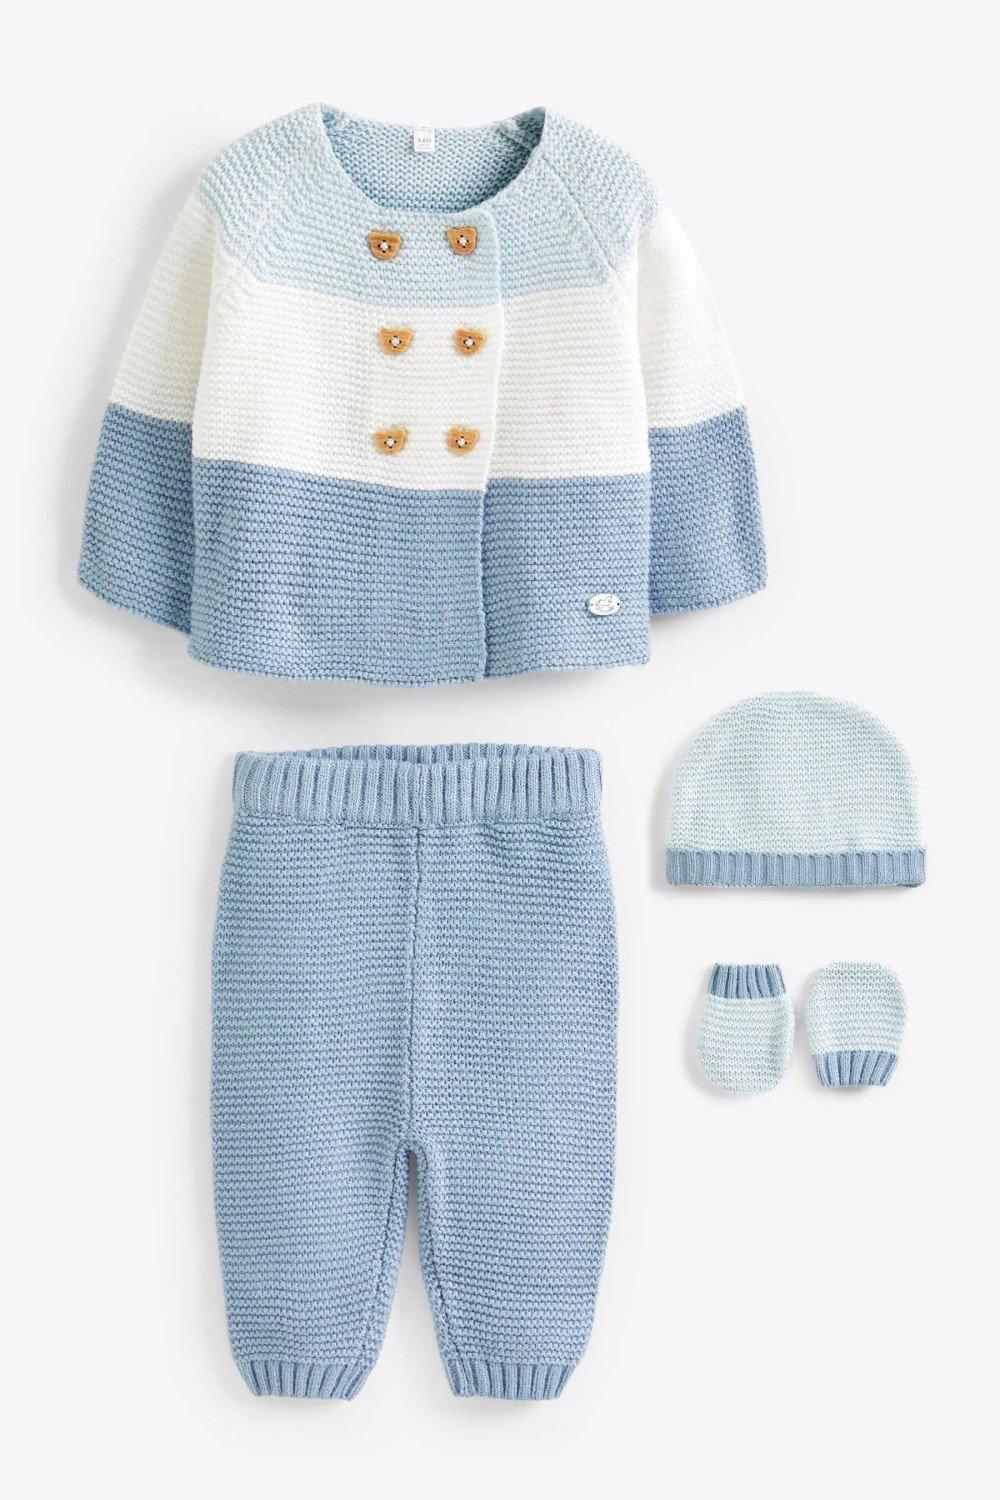 Cardigan, Trouser, Hat and Mittens Boxed Gift Set